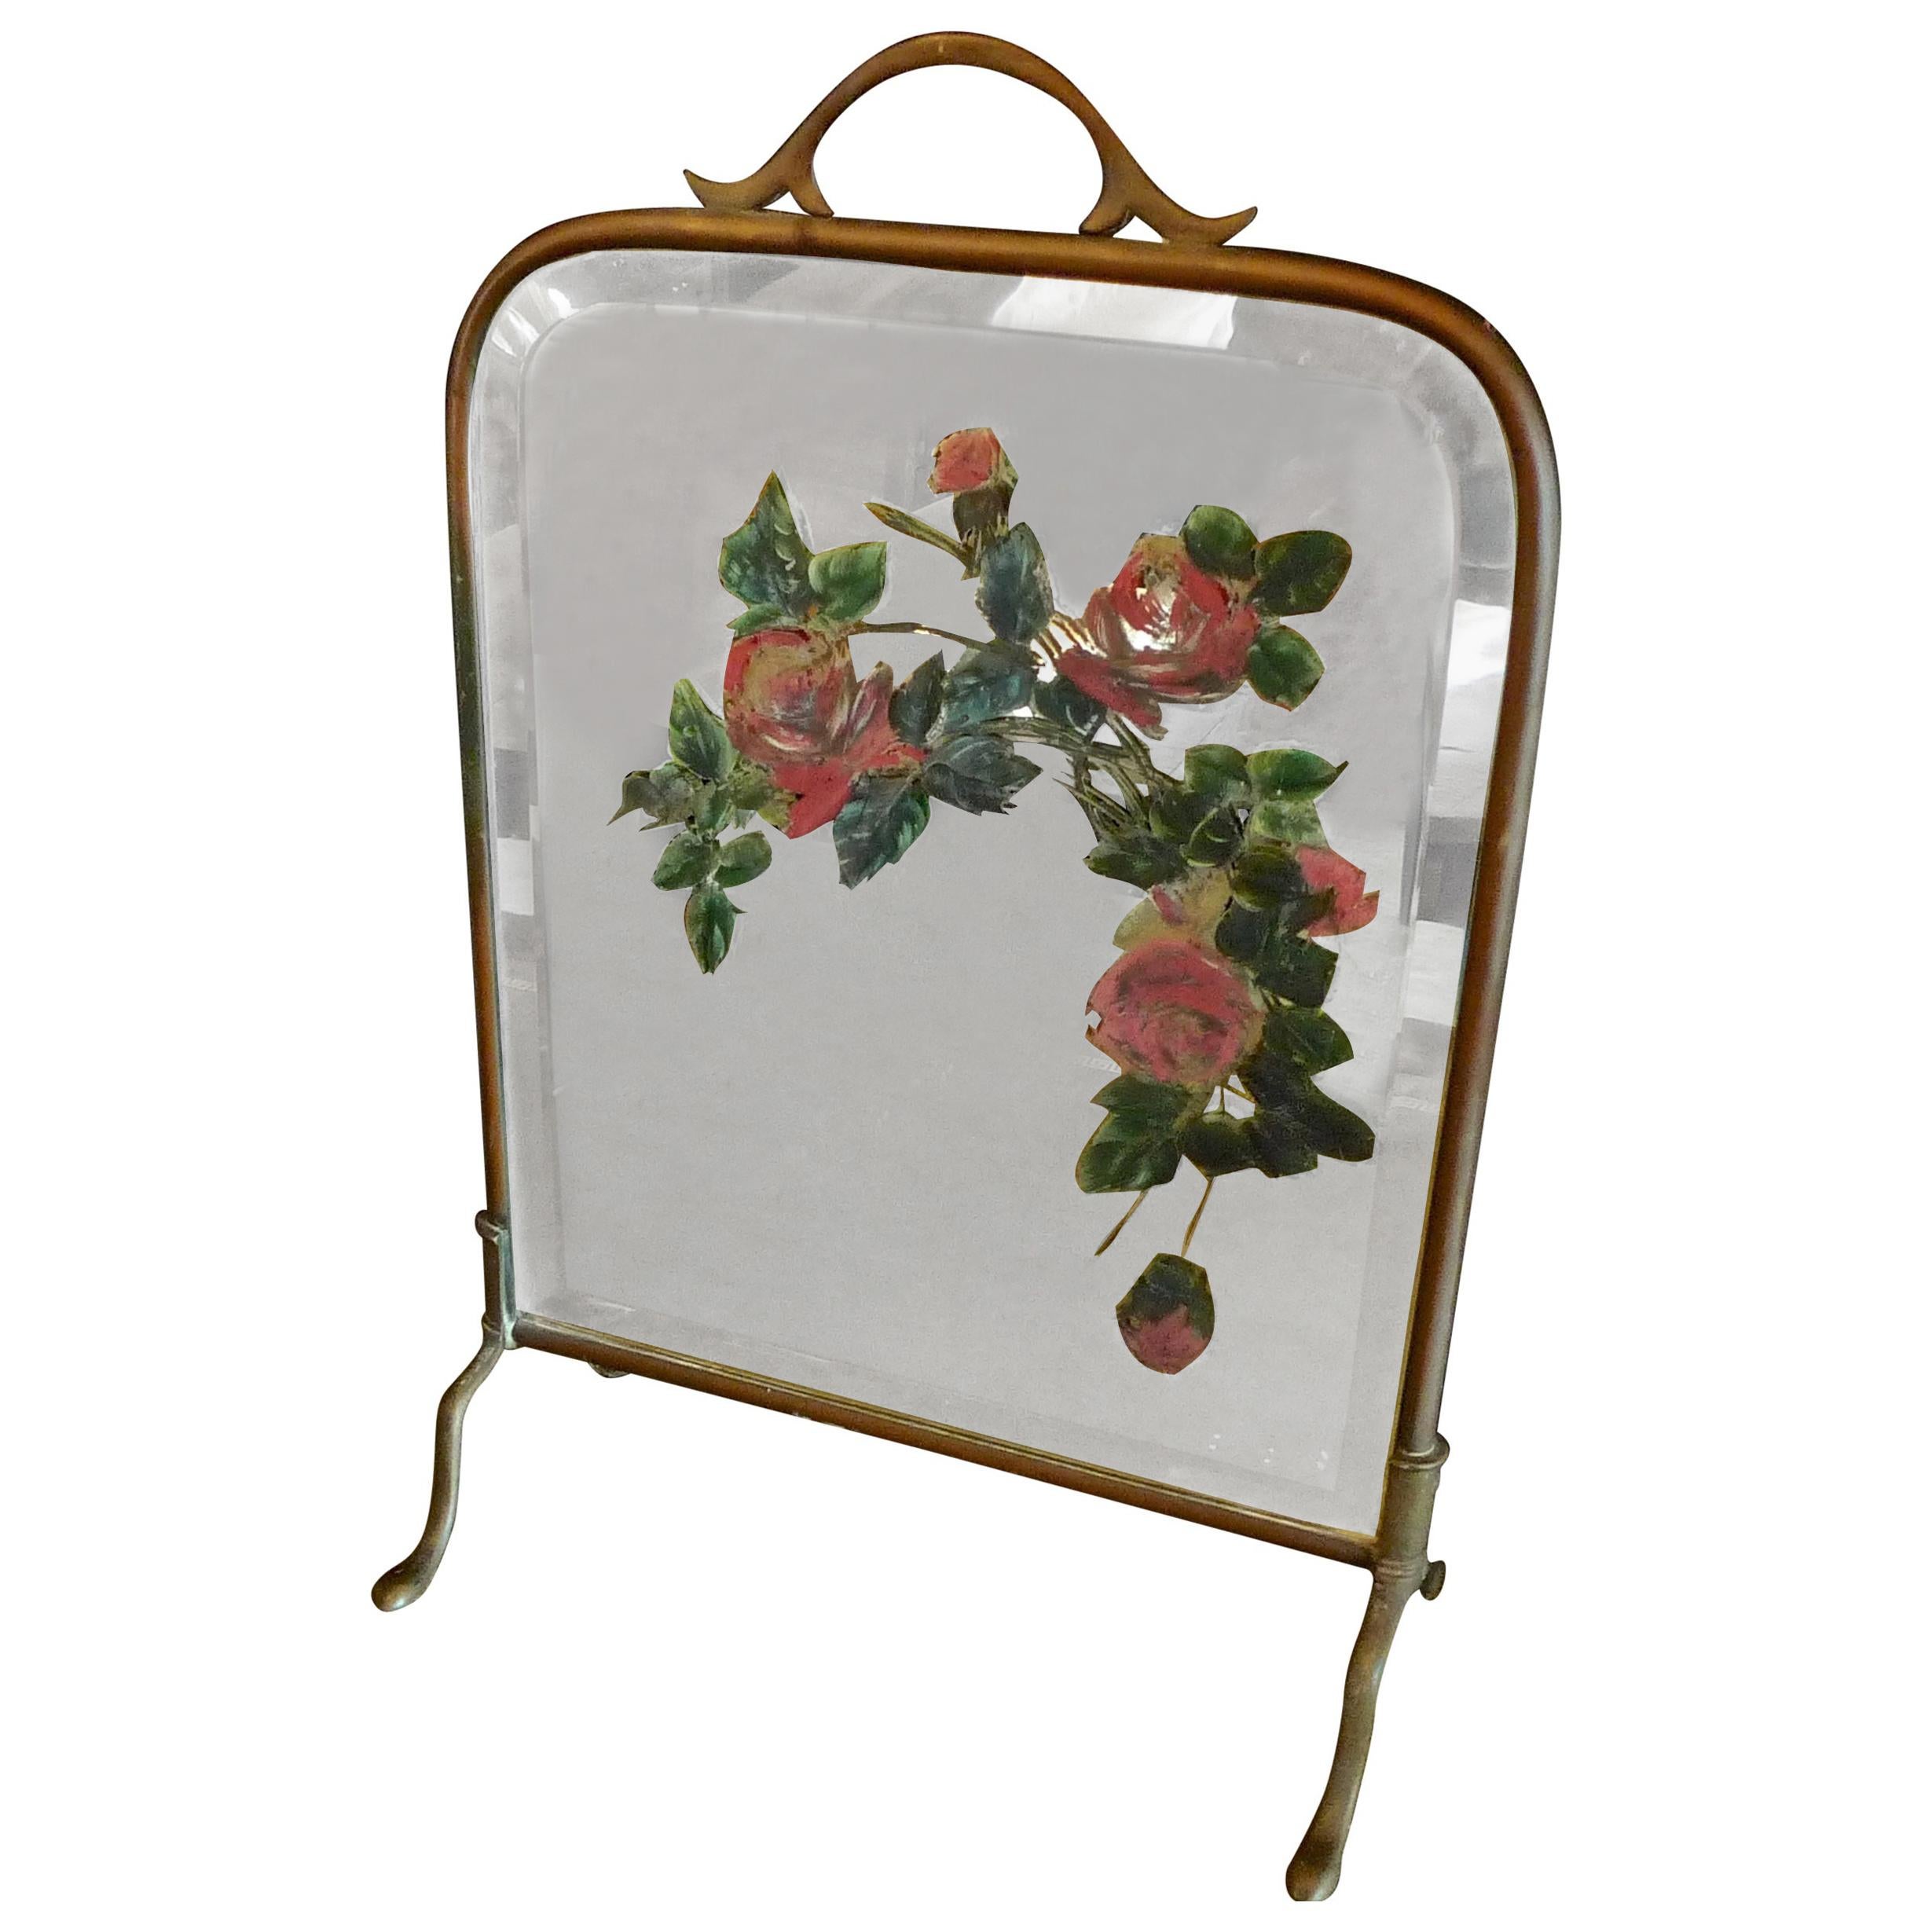 French 1930s mirrored fire screen with handle and painted flowers on beveled mirror glass.